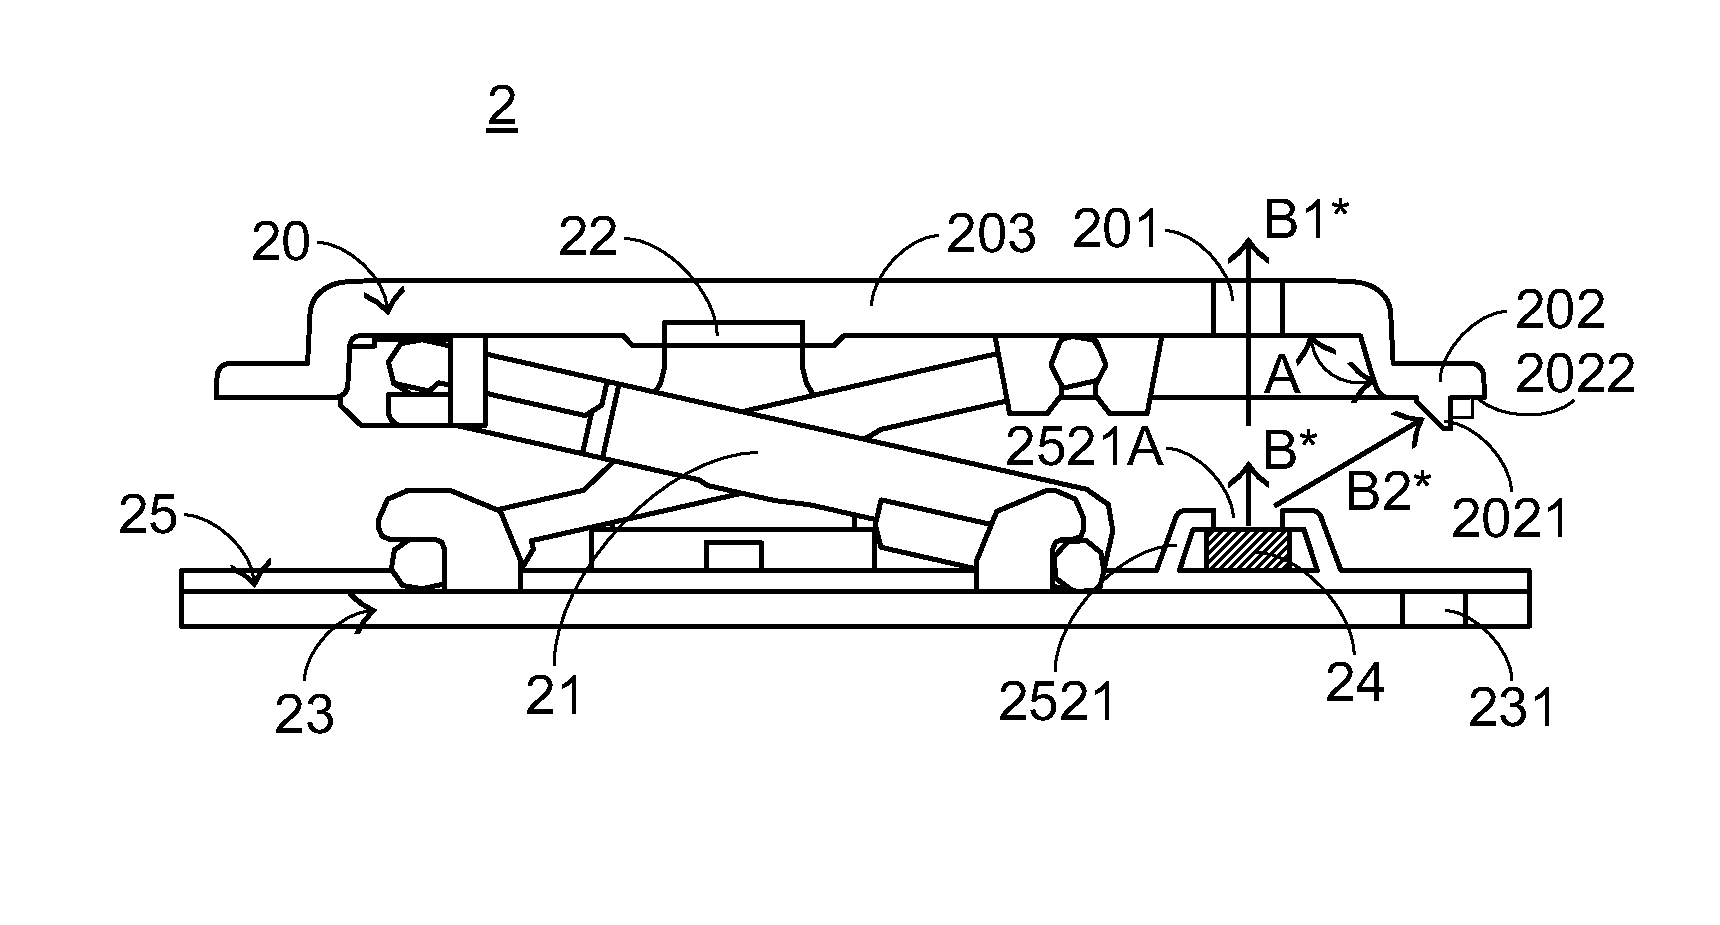 Key structure with scissors-type connecting member